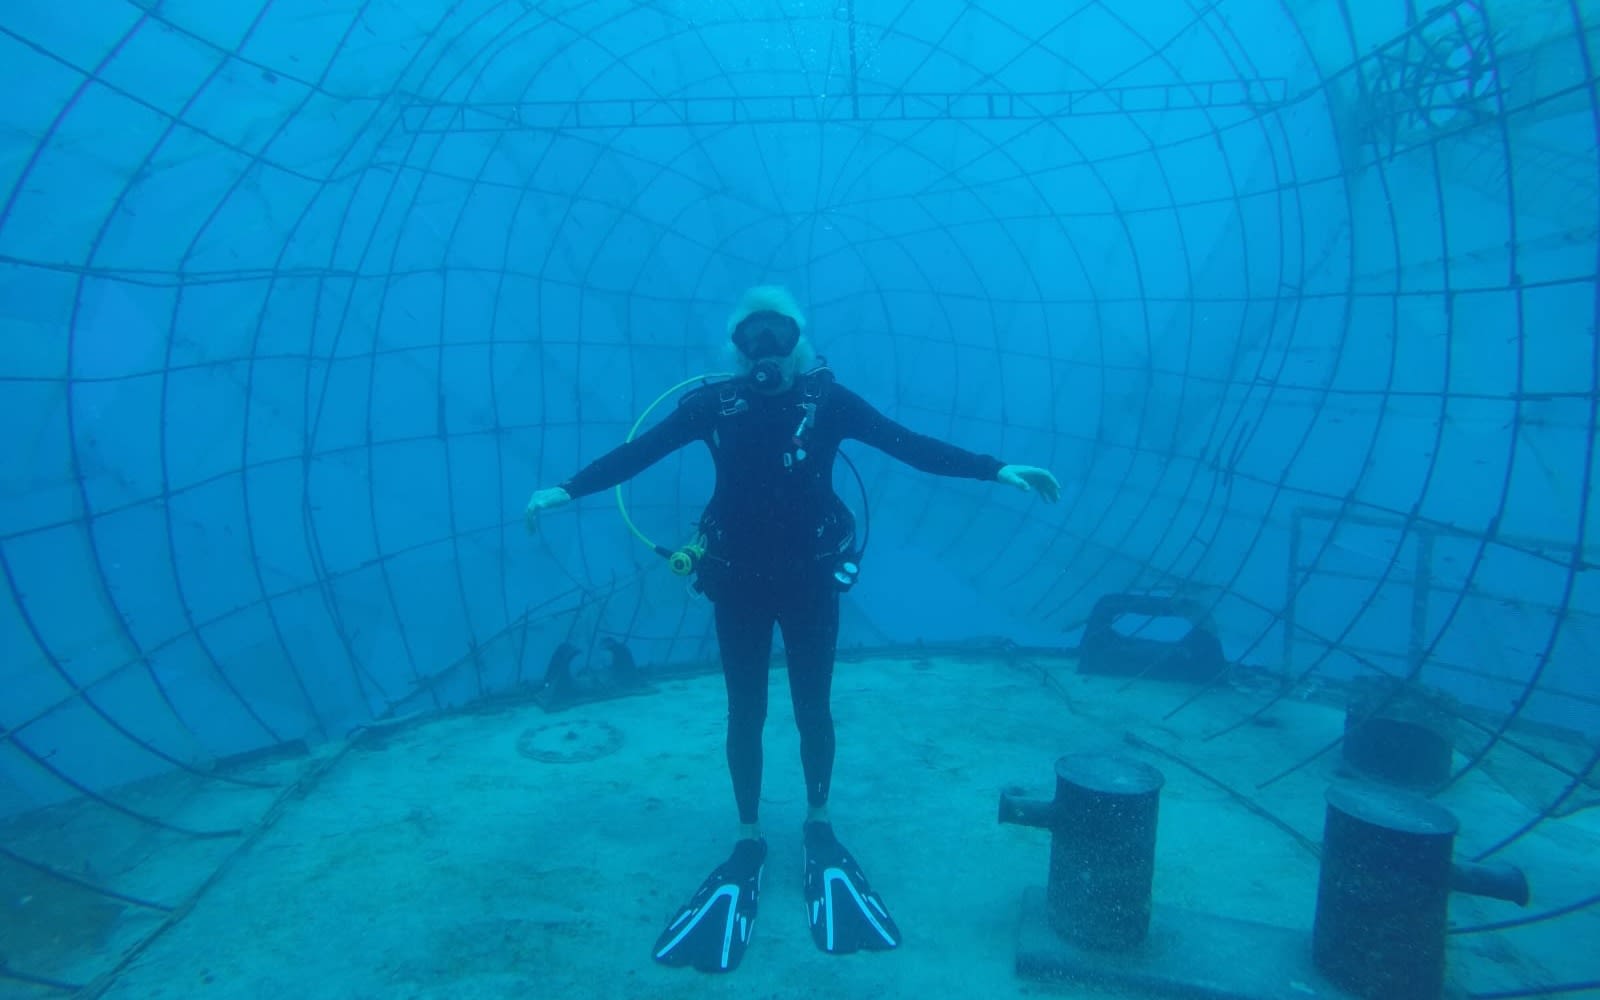 Richard Branson scuba diving in large cage